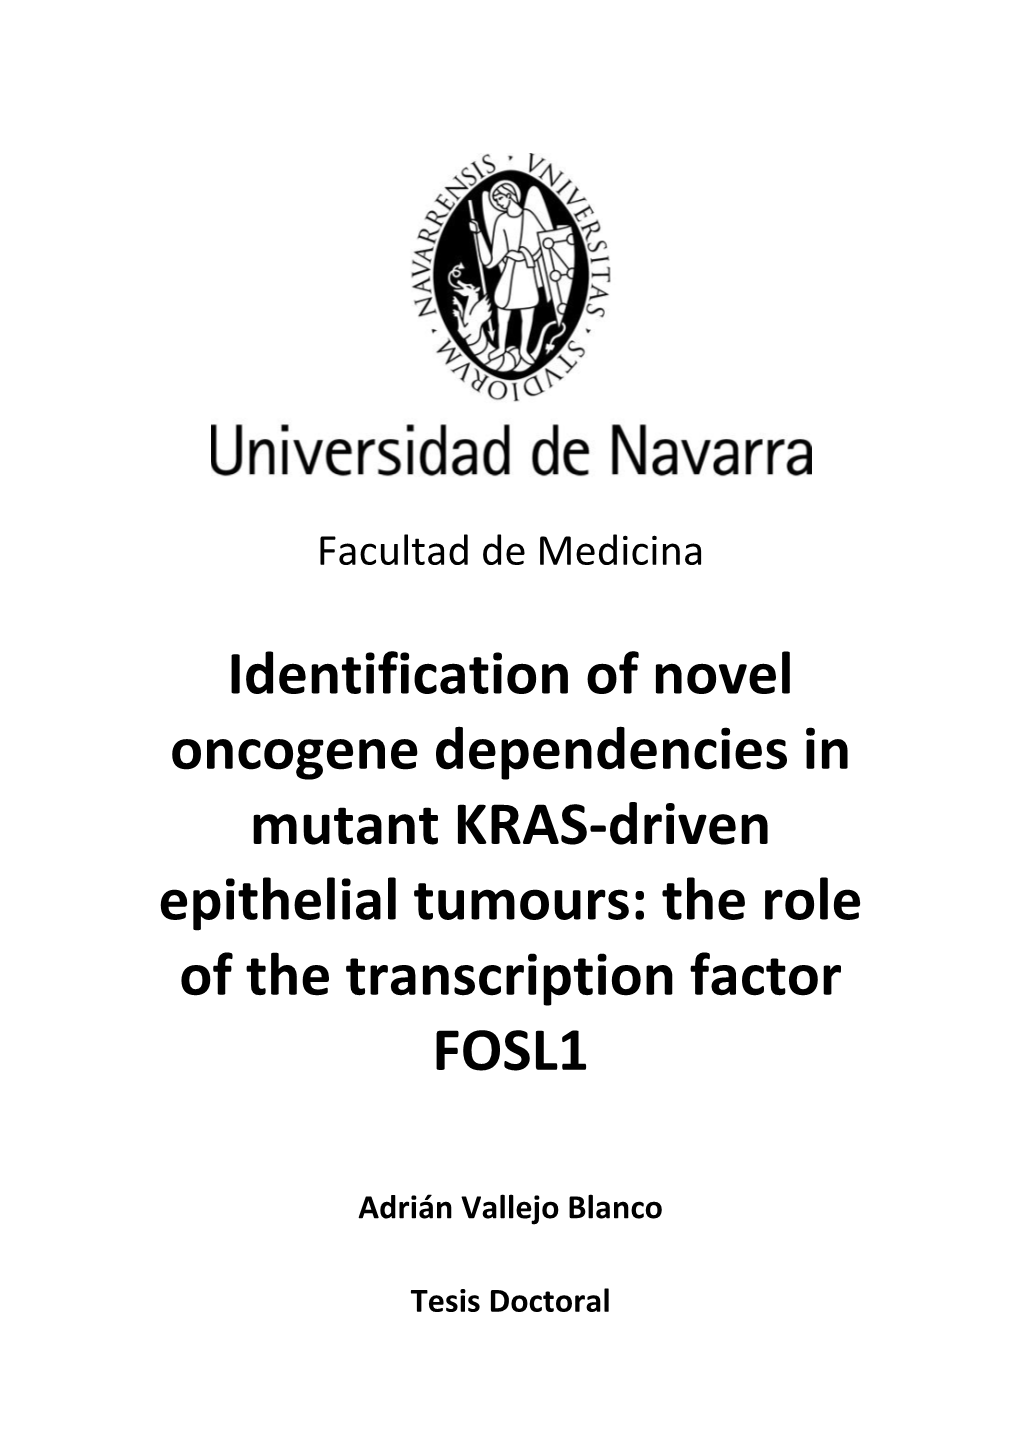 Identification of Novel Oncogene Dependencies in Mutant KRAS-Driven Epithelial Tumours: the Role of the Transcription Factor FOSL1